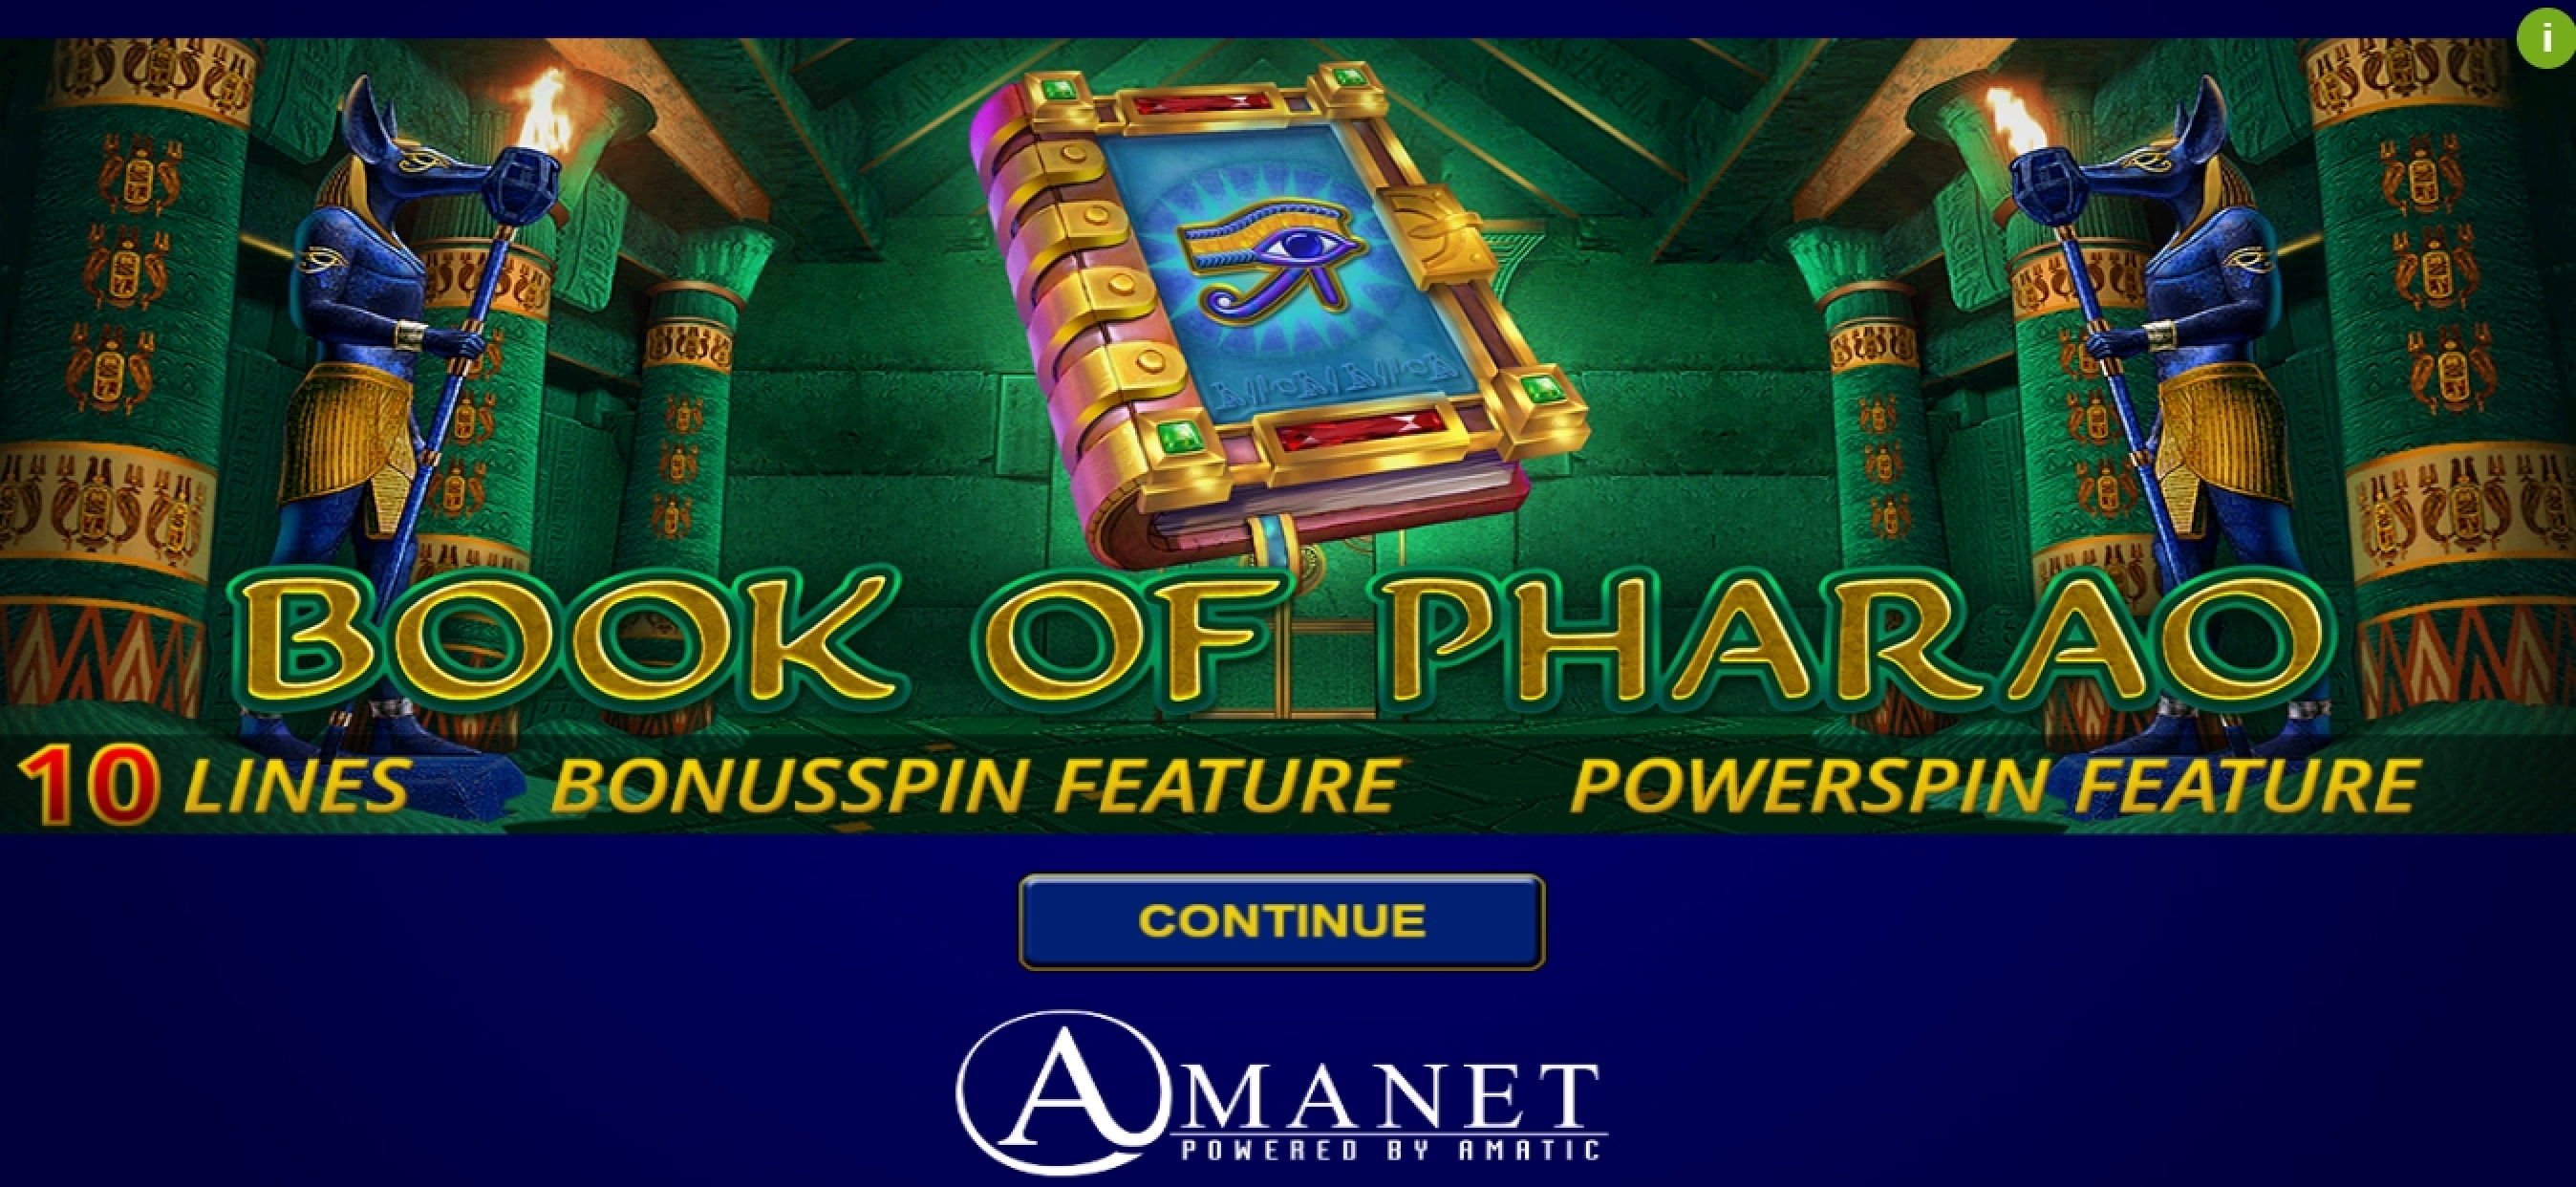 Play Book of Pharao Free Casino Slot Game by Amatic Industries